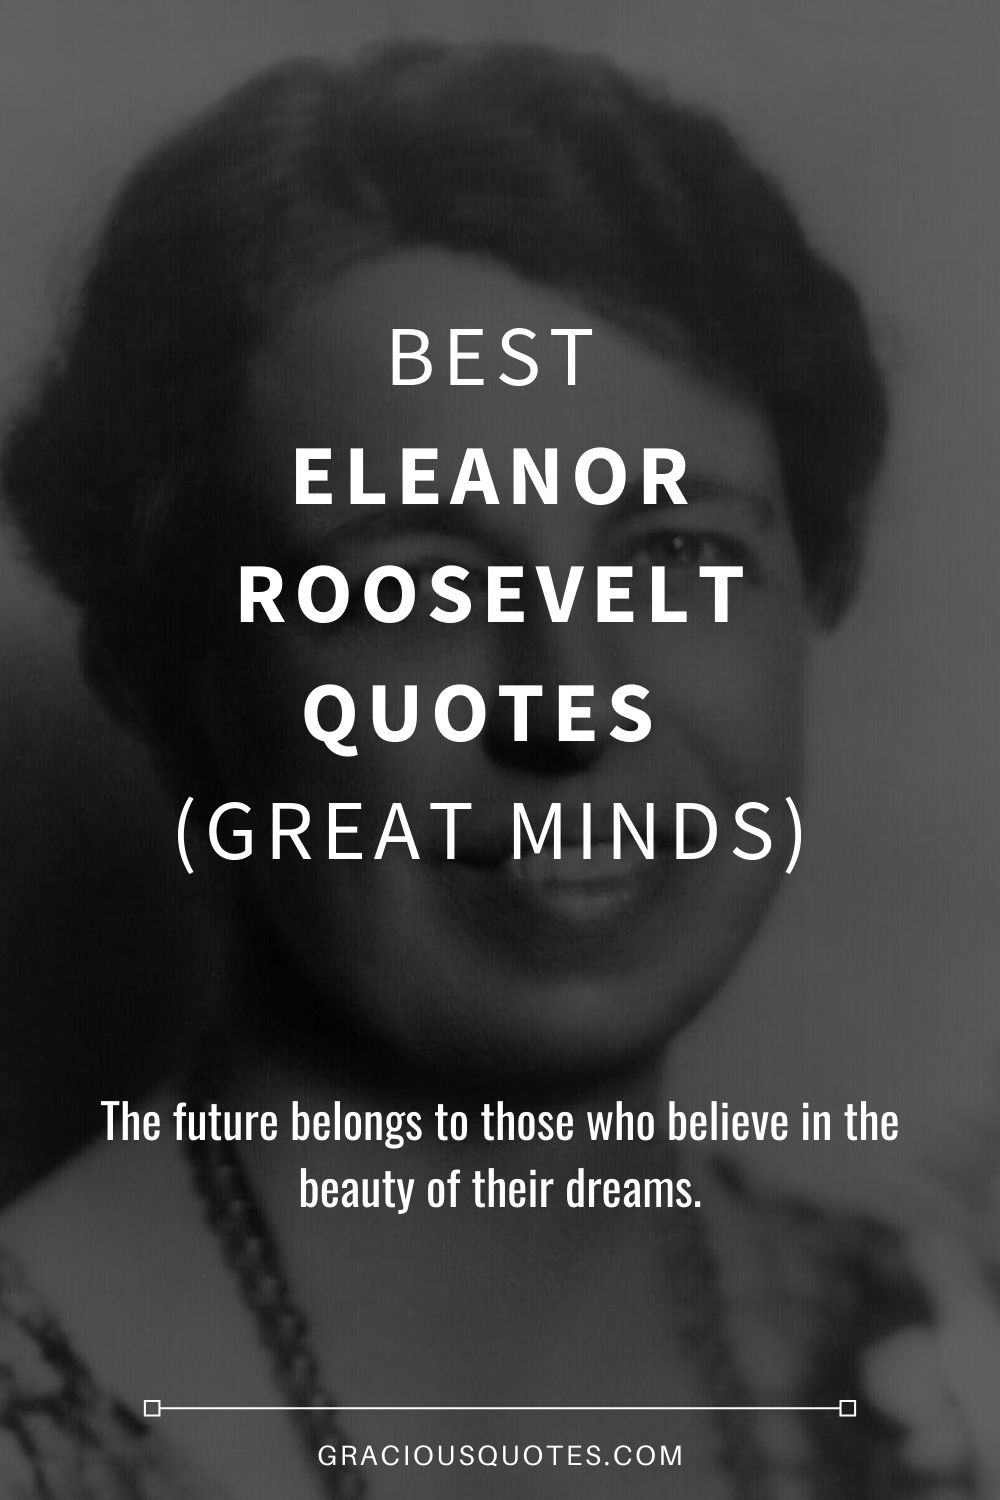 Best Eleanor Roosevelt Quotes (GREAT MINDS) - Gracious Quotes